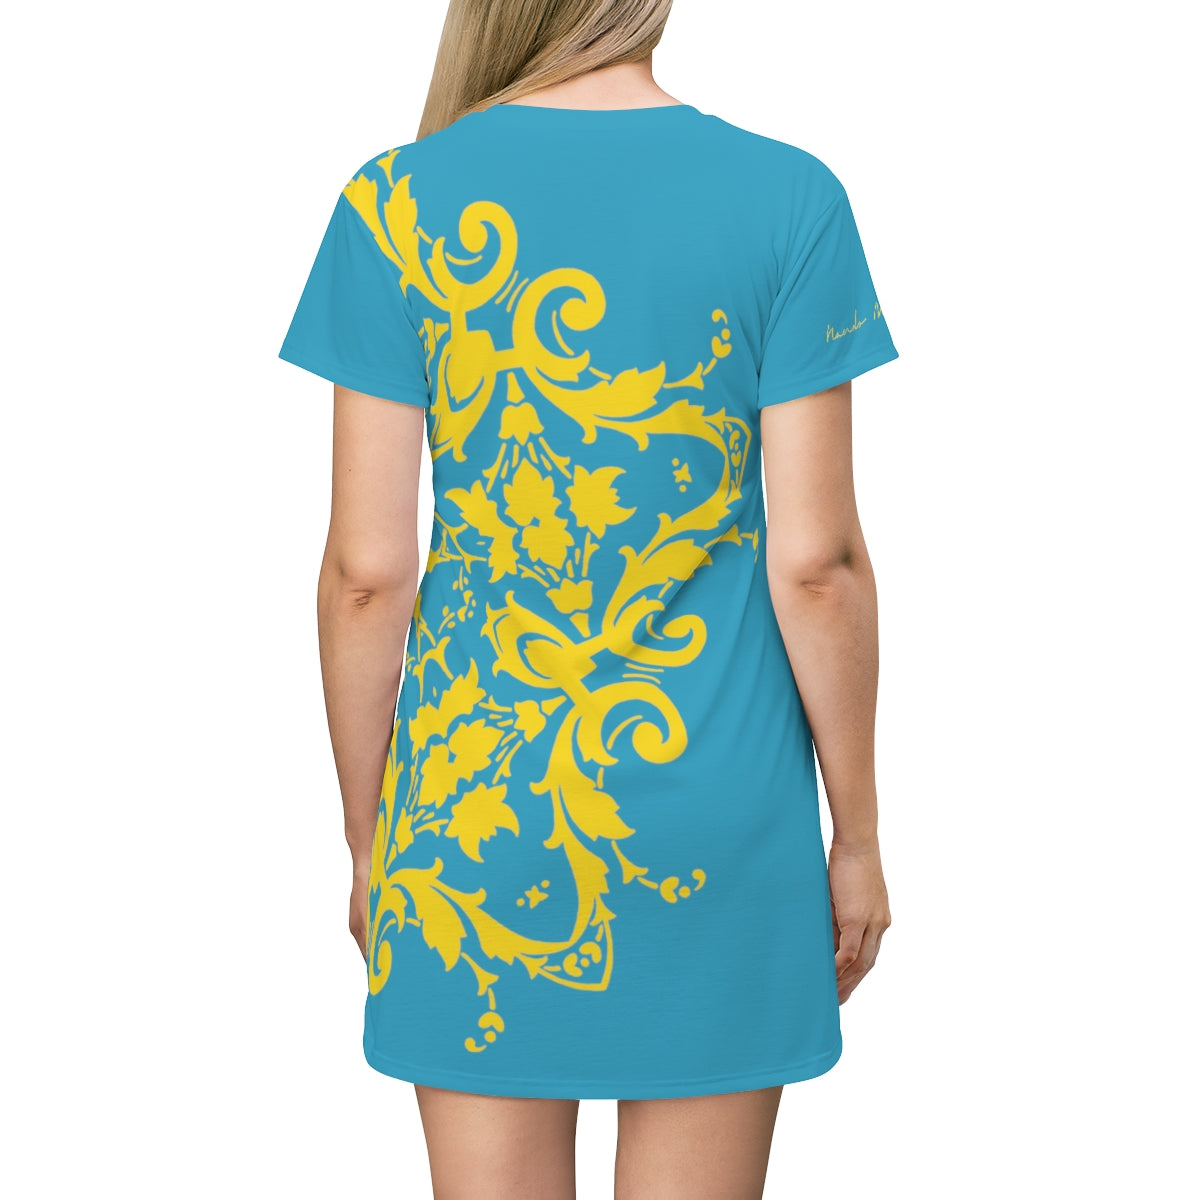 Shirtdress, Yellow Imperial Star